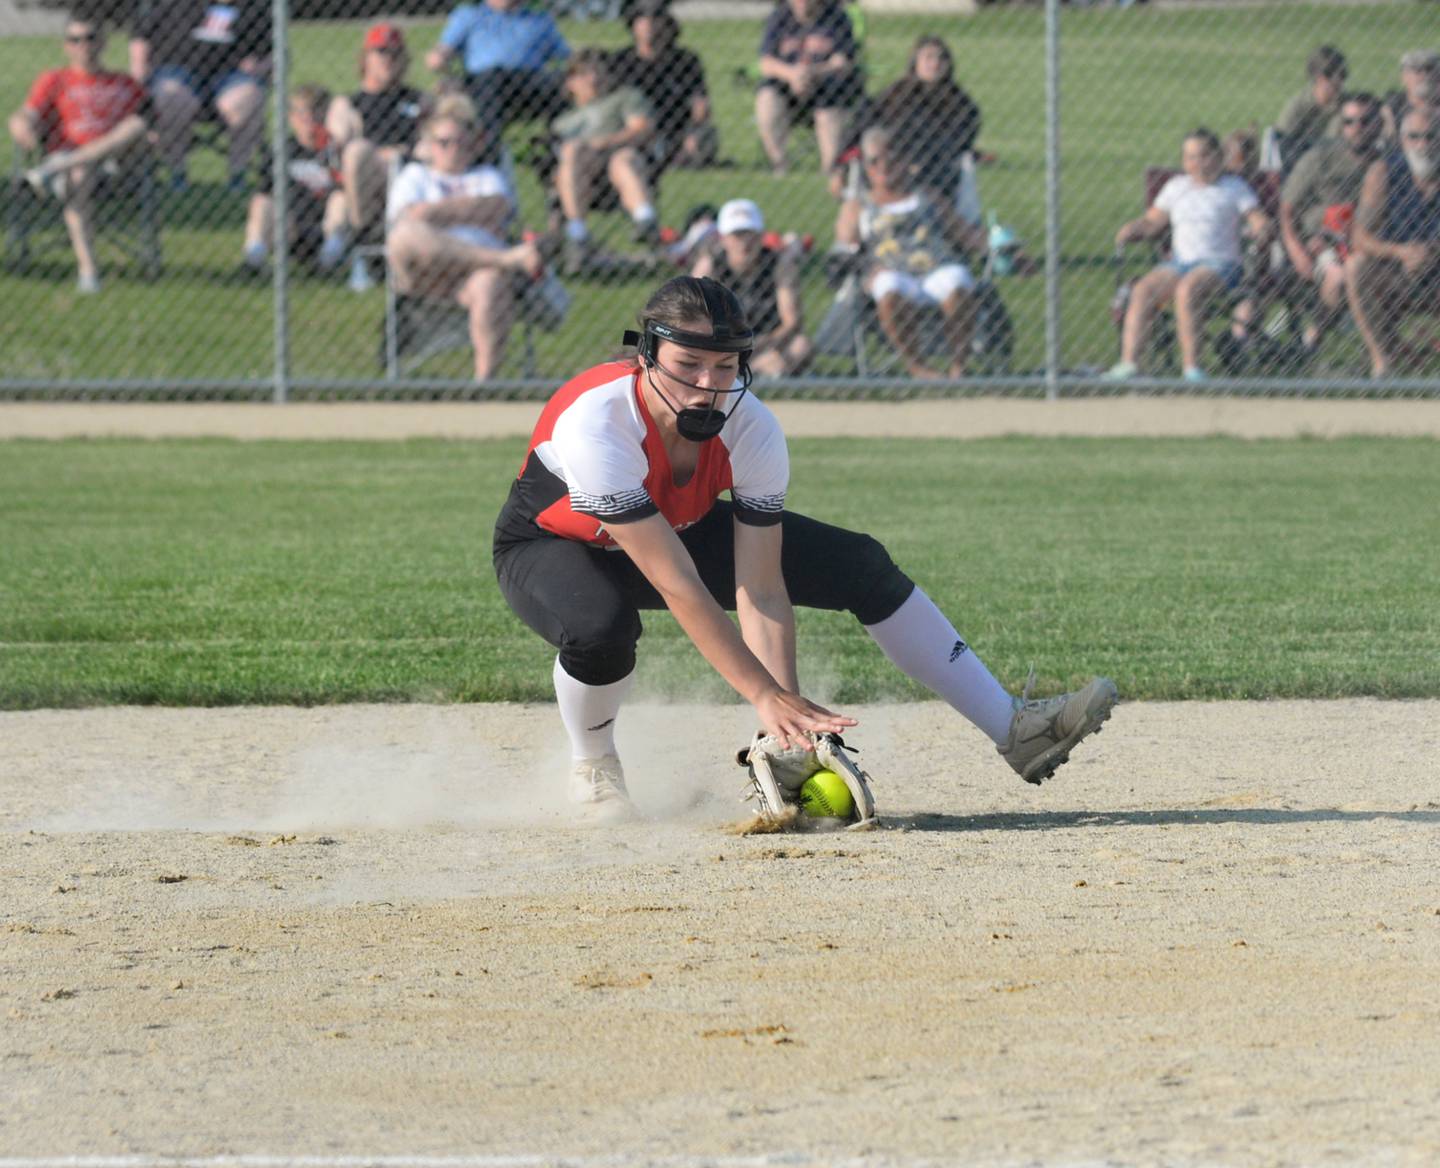 Forreston shortstop Brooke Boettner fields a ground ball during Tuesday's game against Orangeville at the 1A Forreston Sectional. The Cardinals lost the game 9-1.